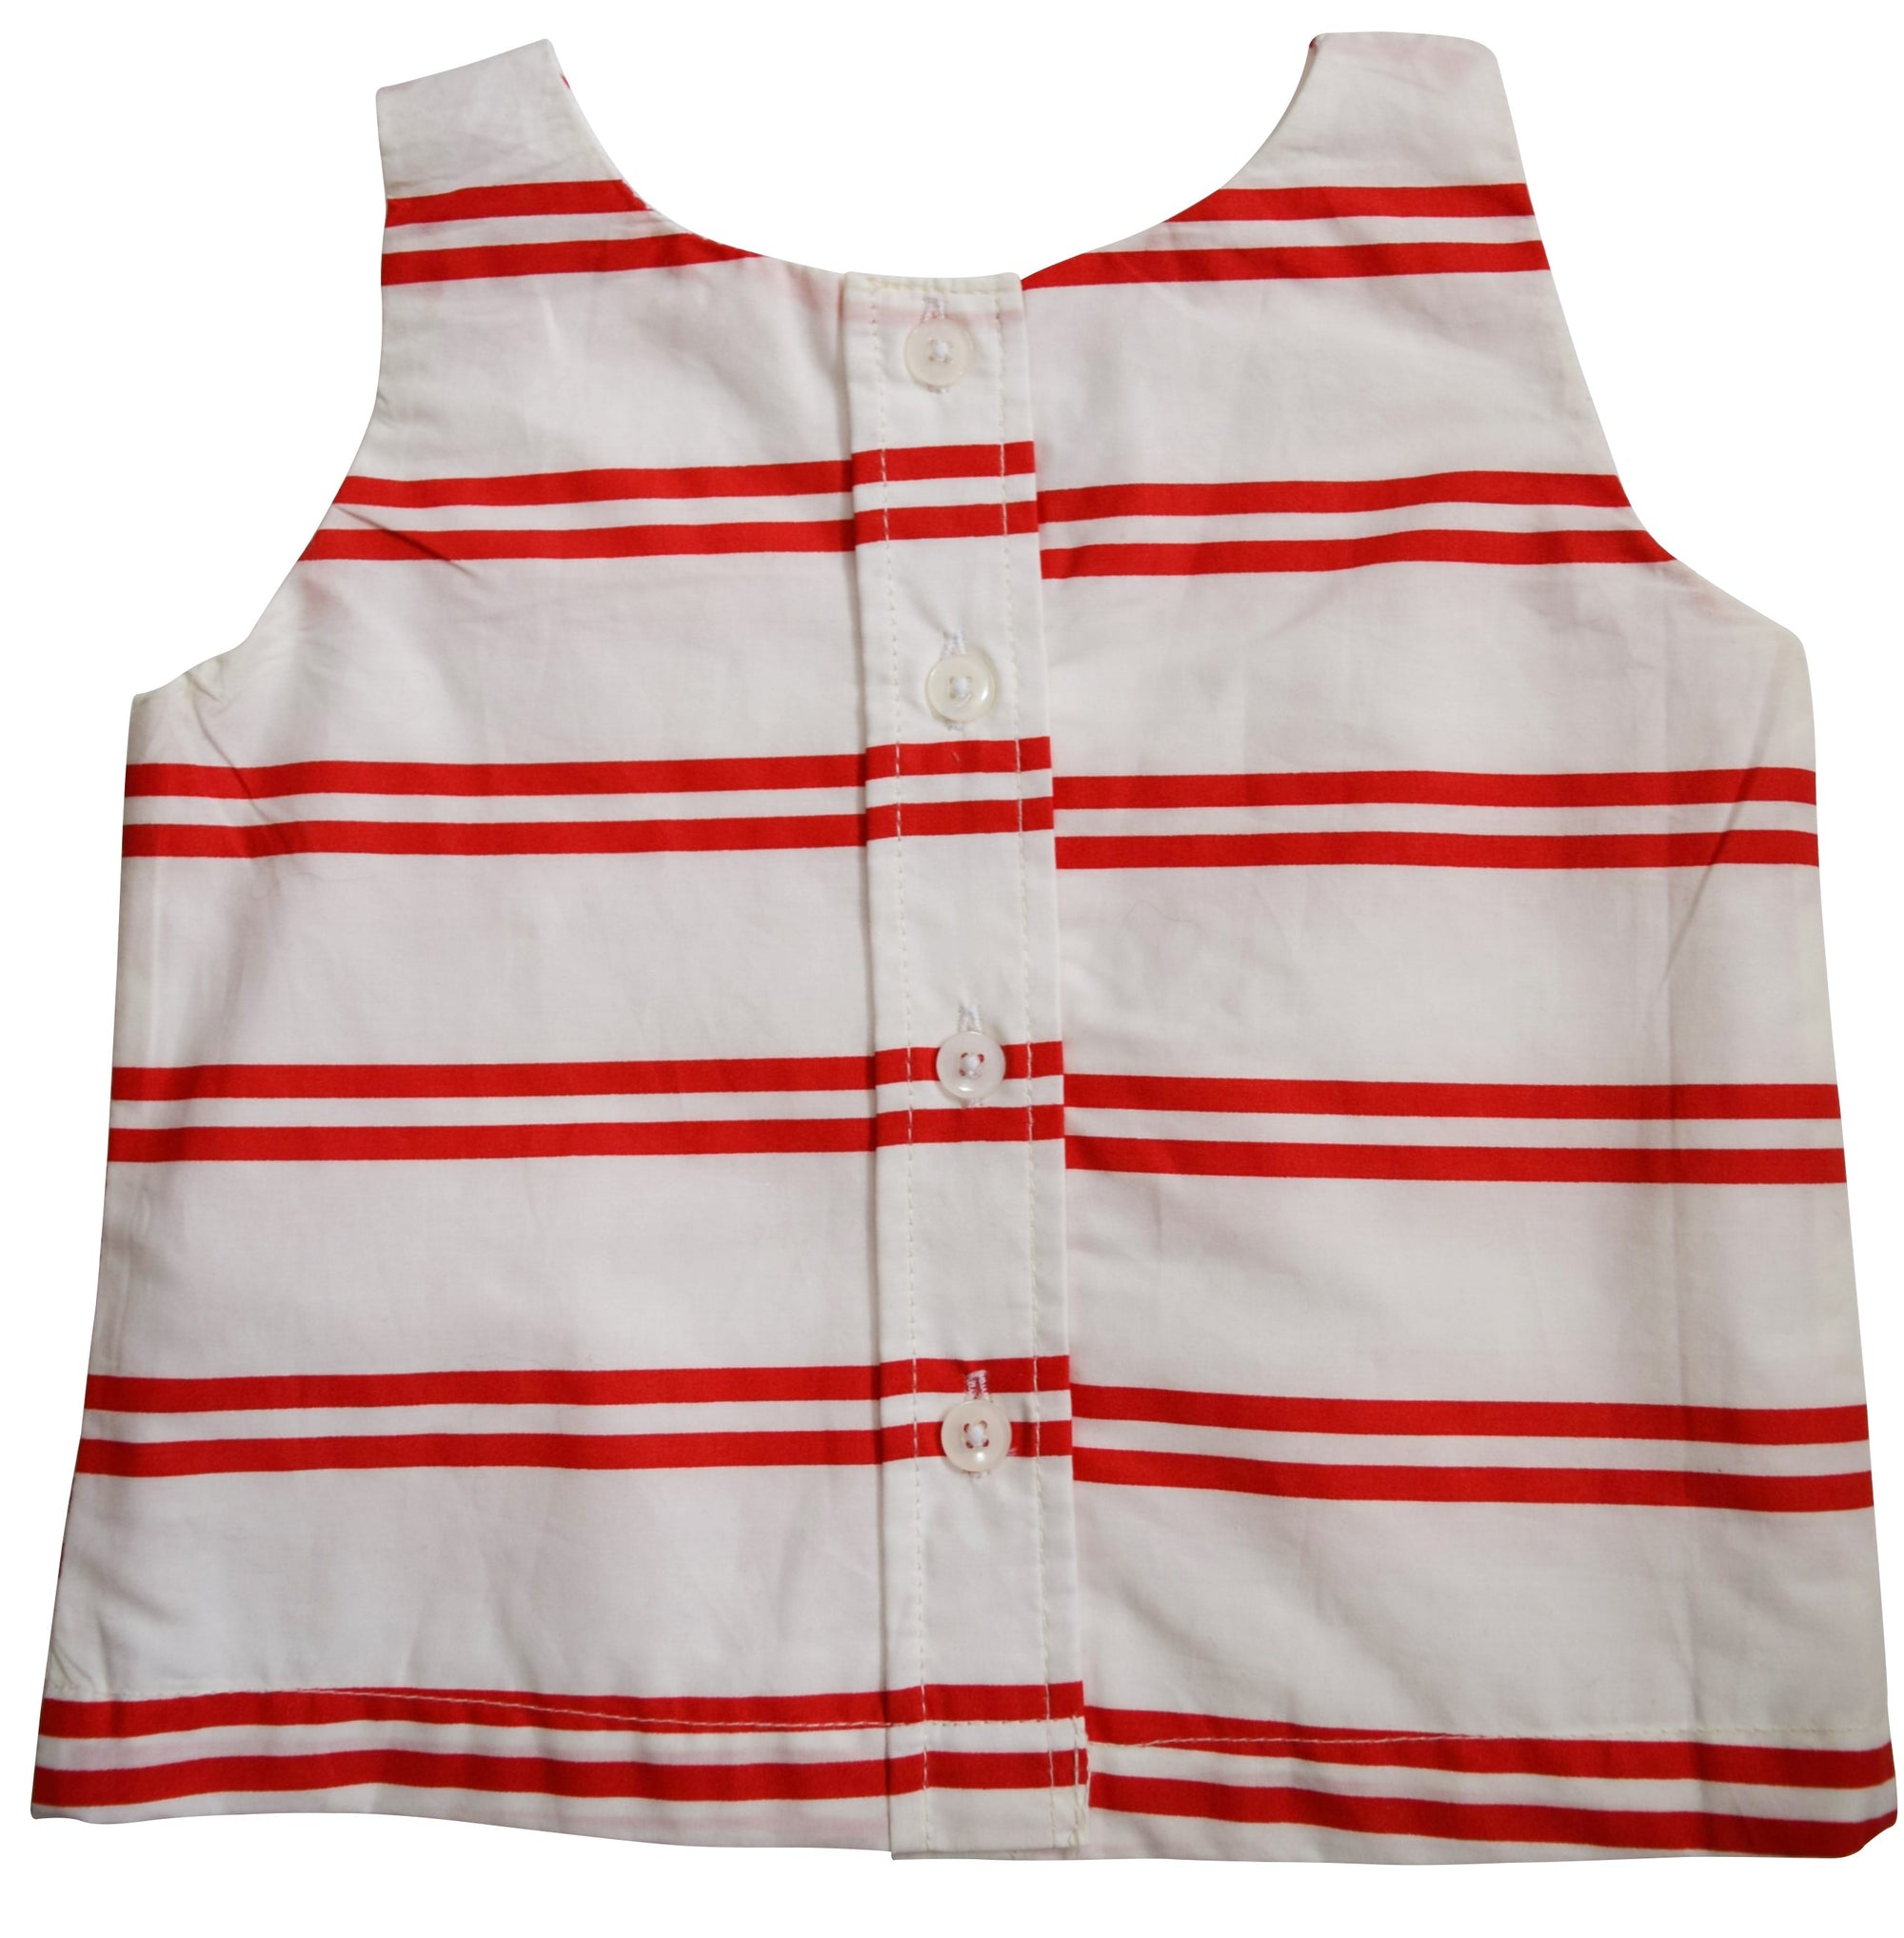 Red & Ivory Striped Top to go with skirts